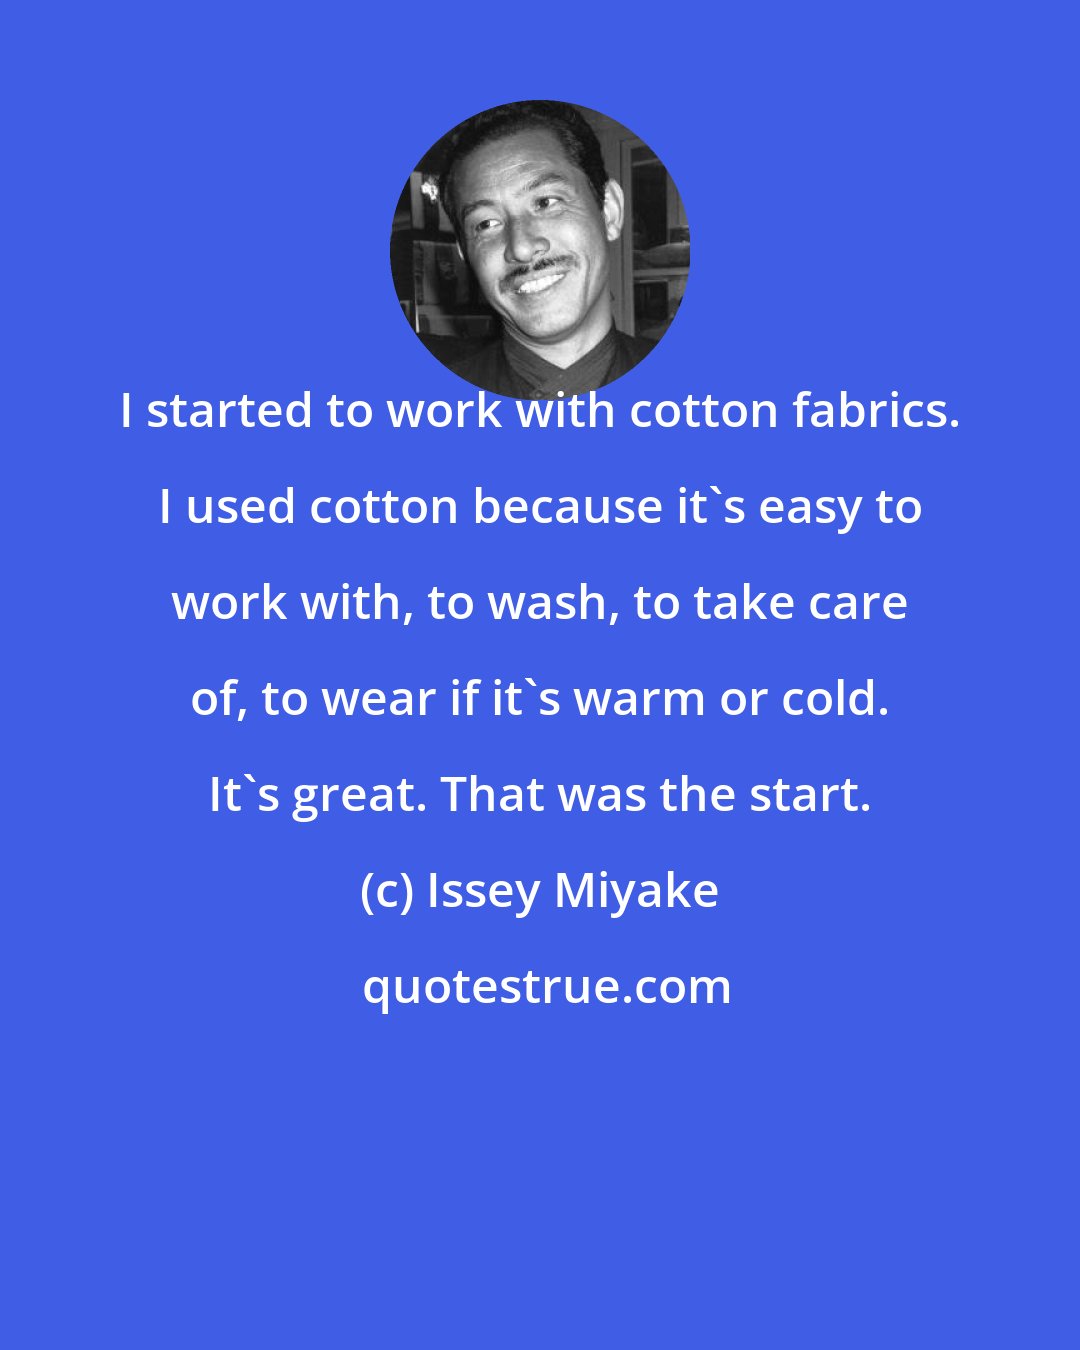 Issey Miyake: I started to work with cotton fabrics. I used cotton because it's easy to work with, to wash, to take care of, to wear if it's warm or cold. It's great. That was the start.